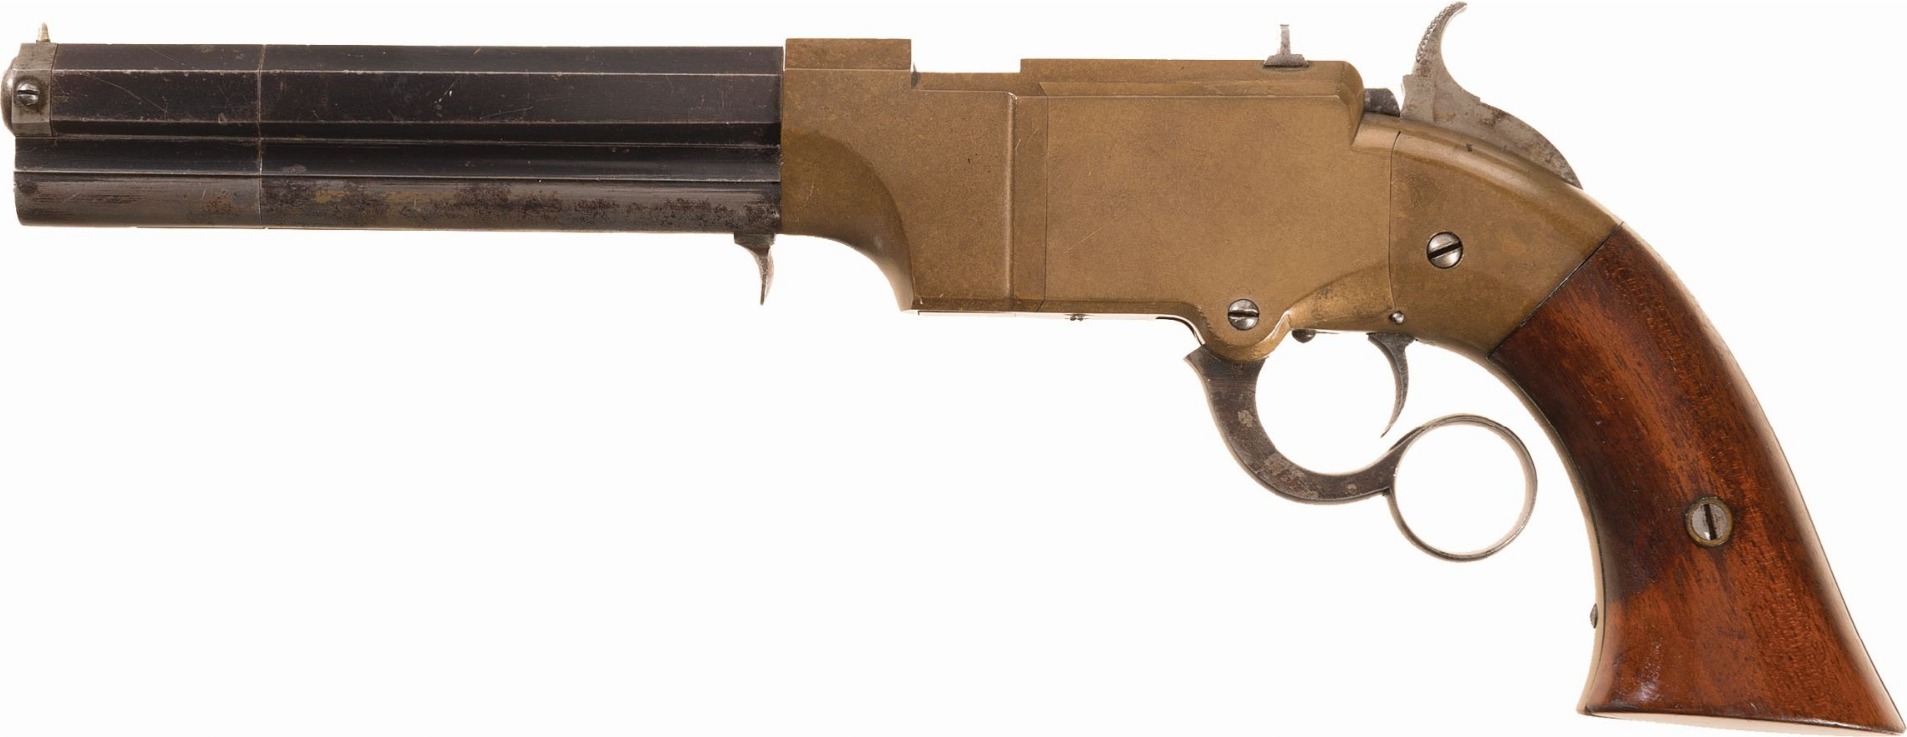 New Haven Arms Volcanic lever action pistol